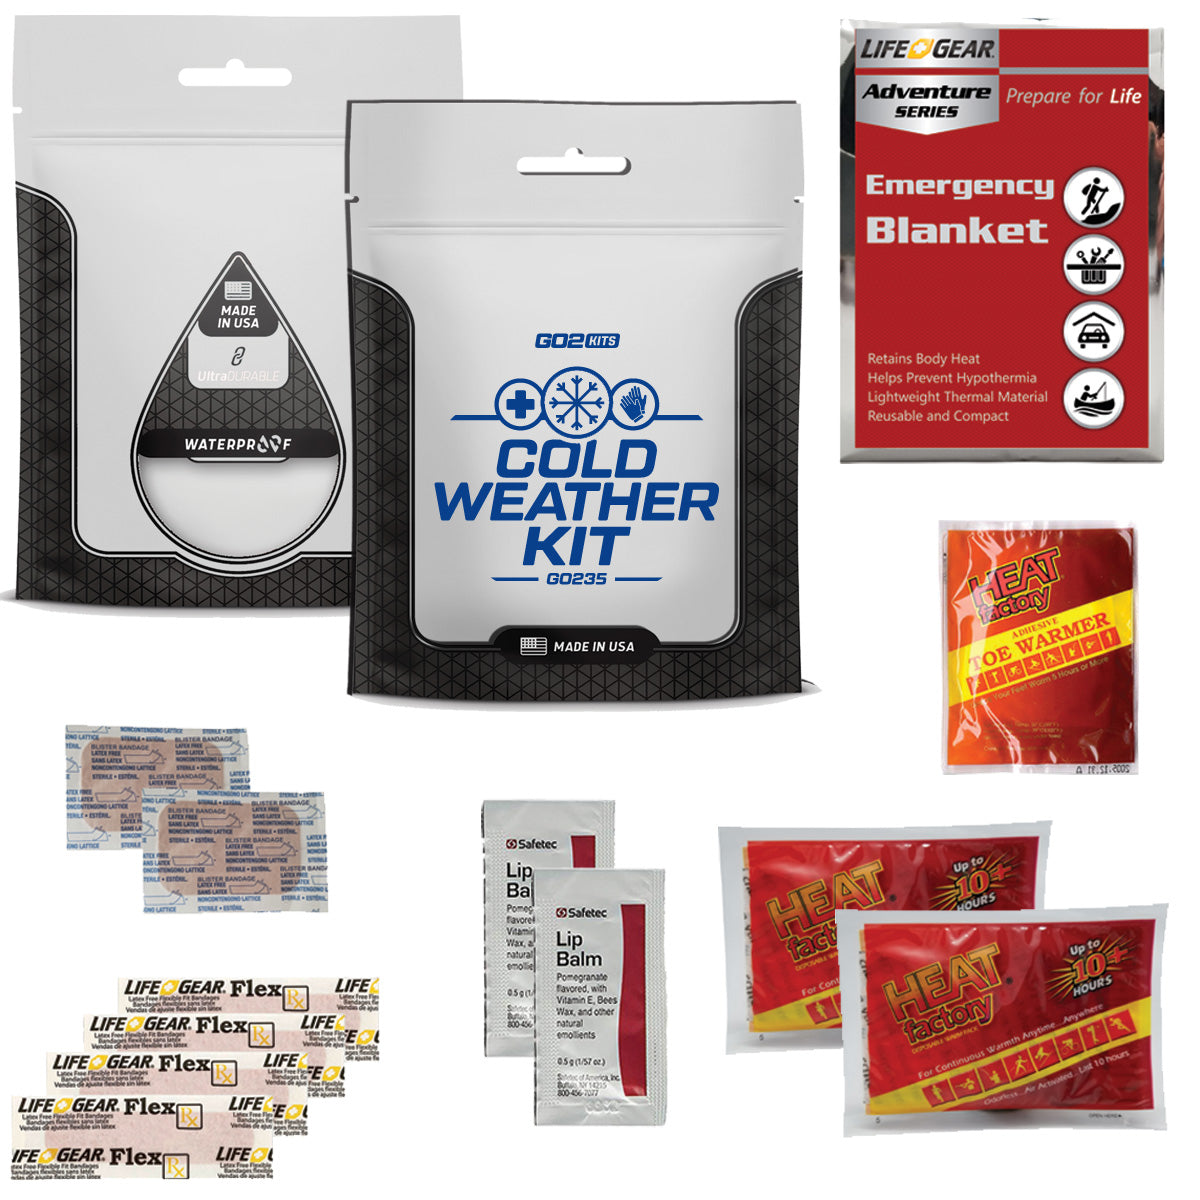 Go2 Kits Cold Weather Winter Kit for Homeless Charity Winter Hygiene Toiletry Kit with Hand Warmers, Space Blanket, Lip Balm & Other Personal Care Essentials (GO235)